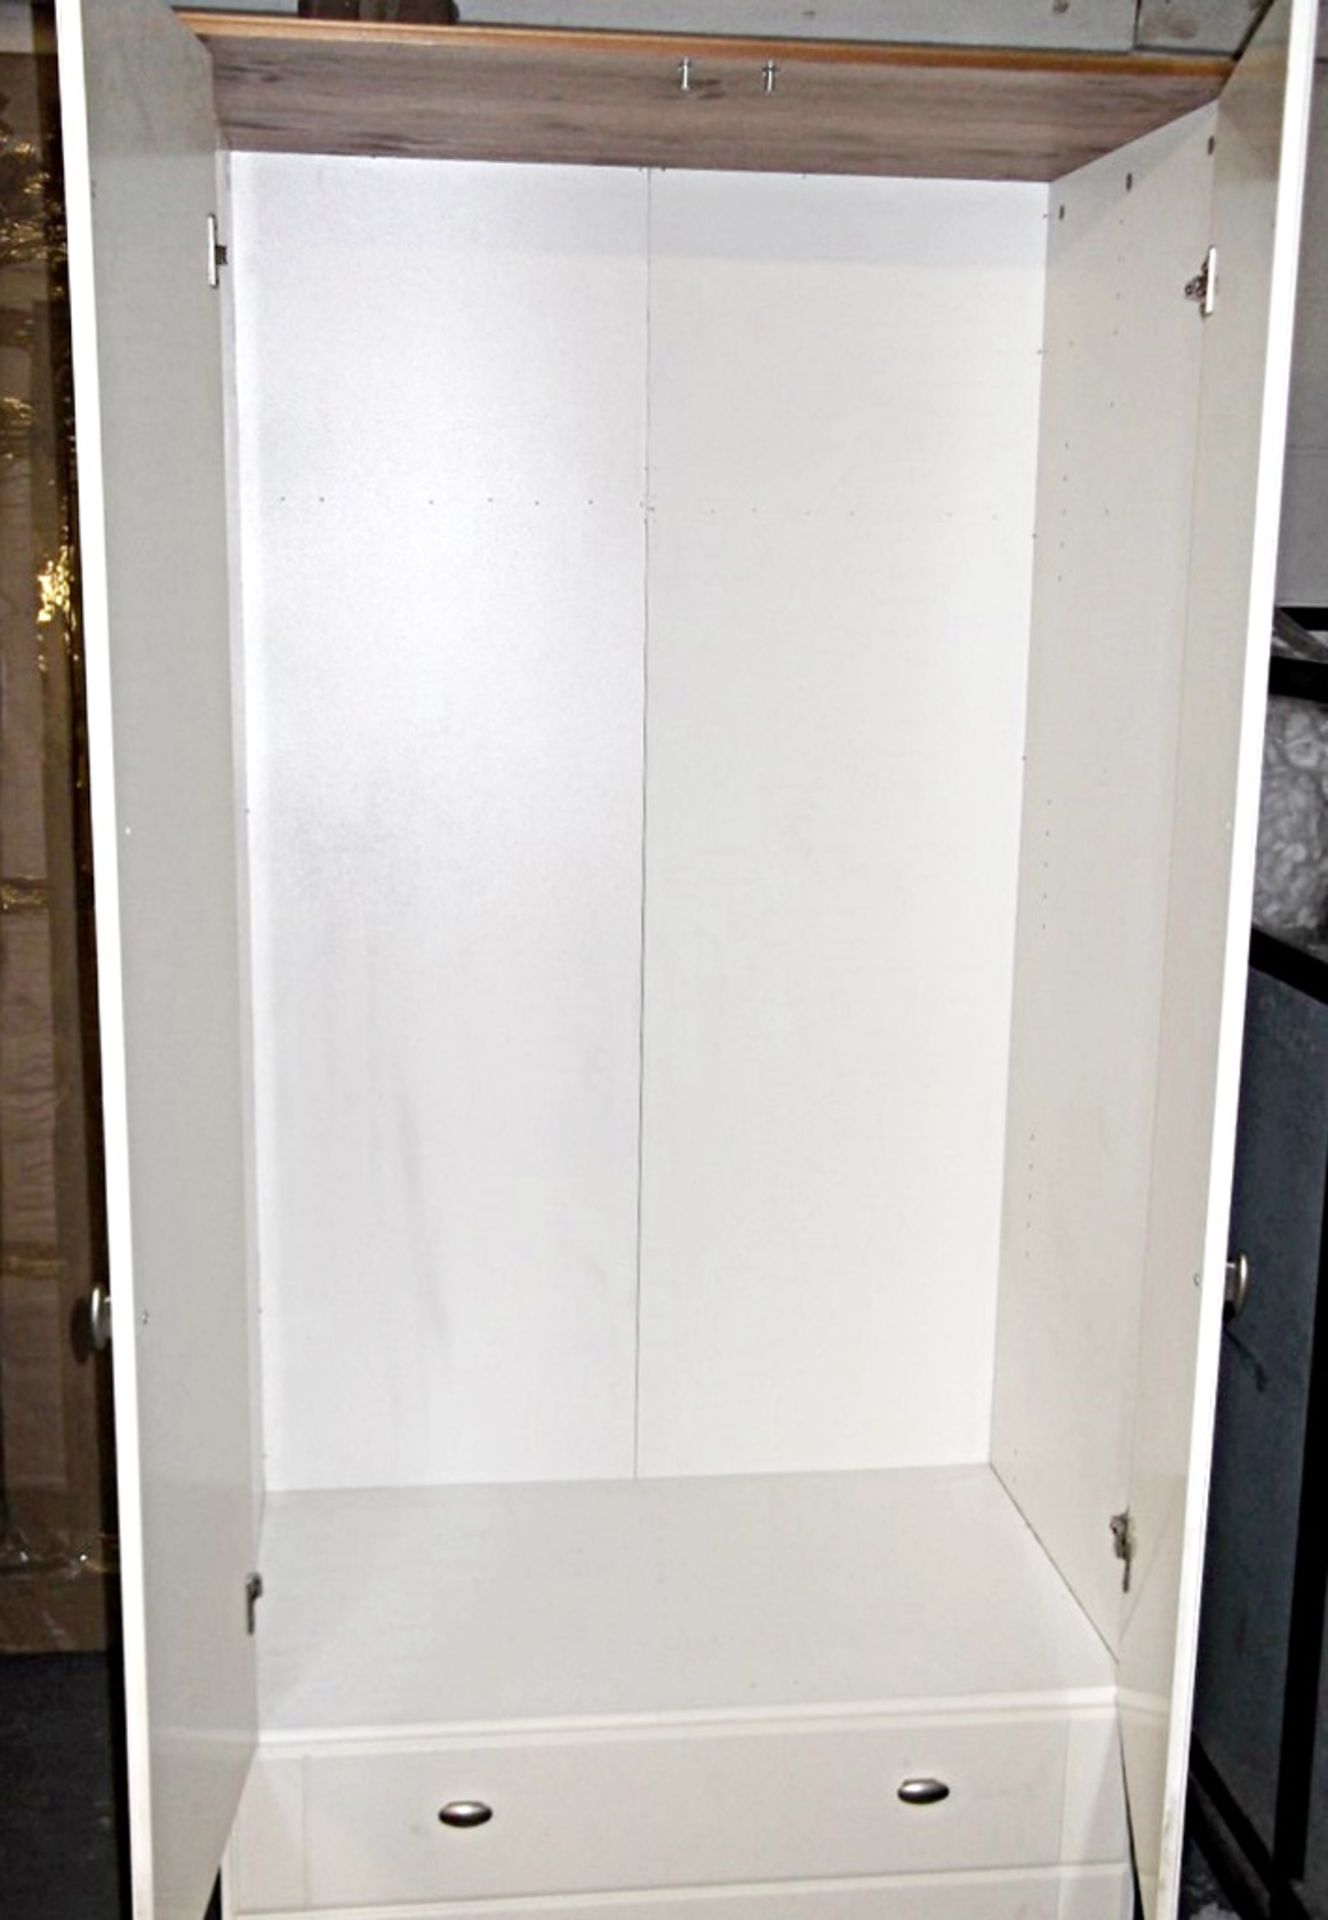 1 x Large Cream Wardrobe - 2 Door,/ 2 Drawer - Pre-Built - Pre-owned, In Good Condition - H181 x W81 - Image 4 of 7